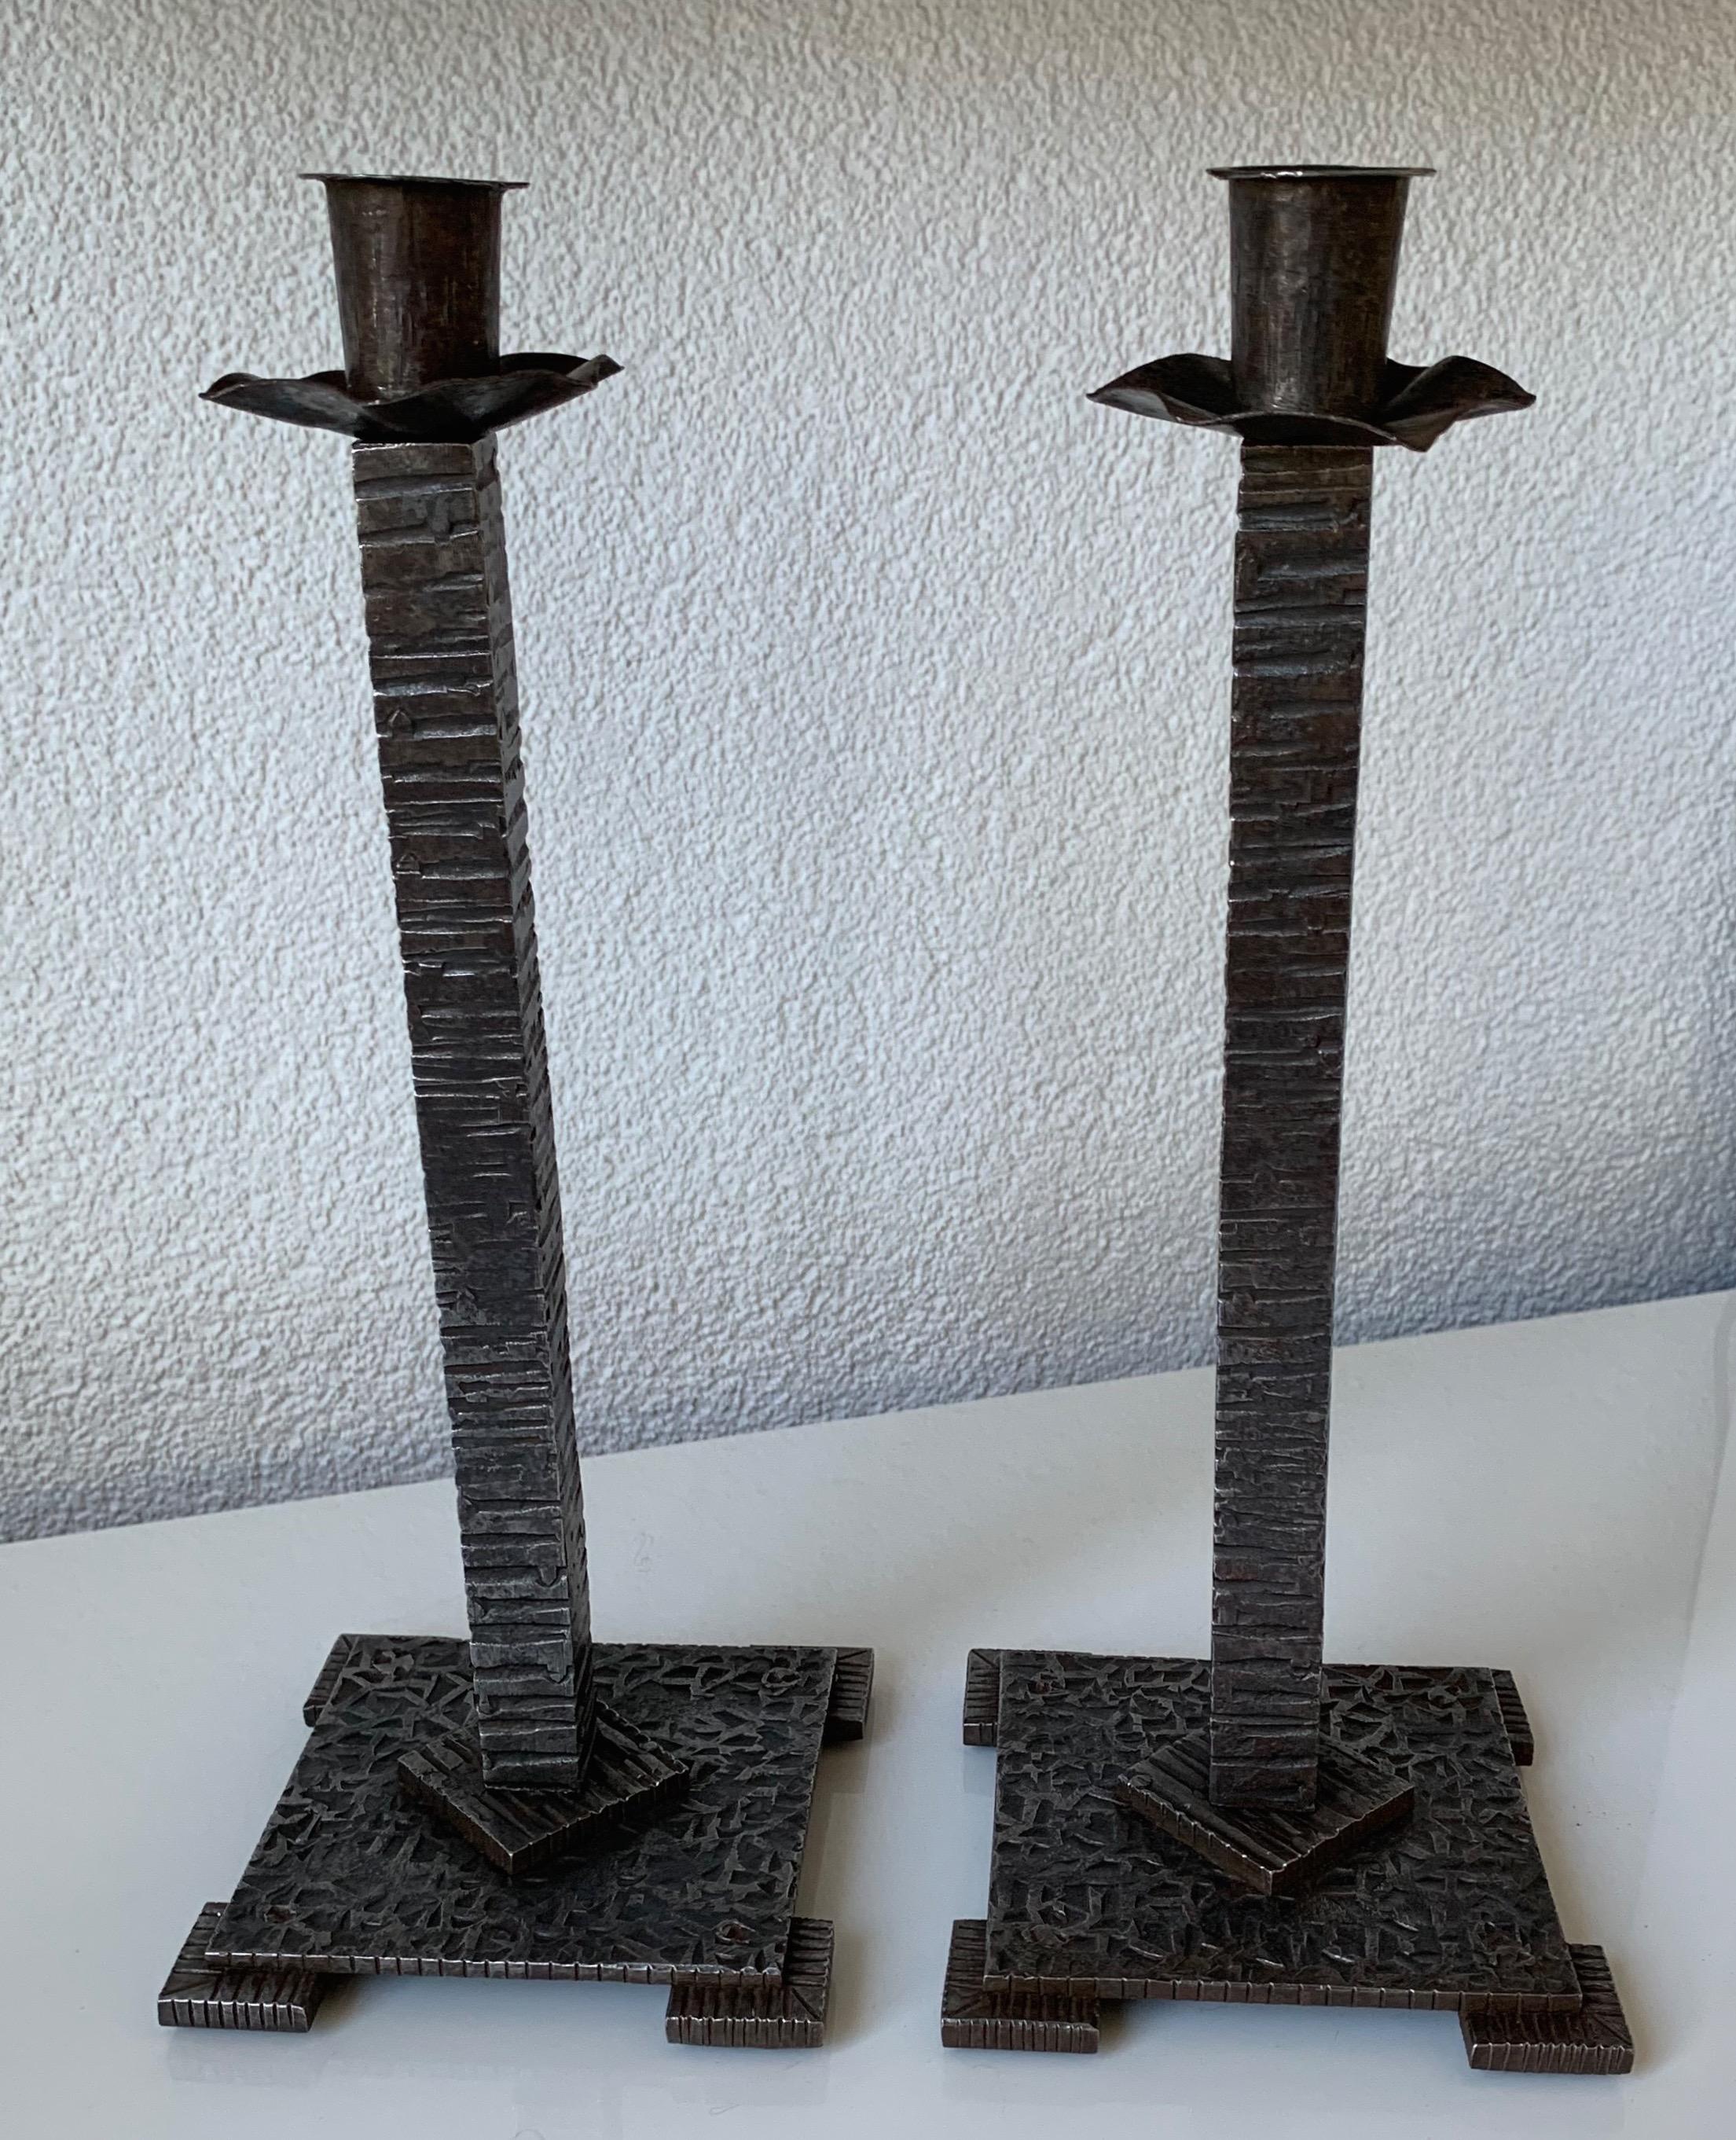 Beautiful and very stylish pair of timeless candle sticks.

If you are looking for beautiful antiques to grace your living space then this hand forged and timeless pair could be yours to own and enjoy soon. They are truly stylish, beautifully